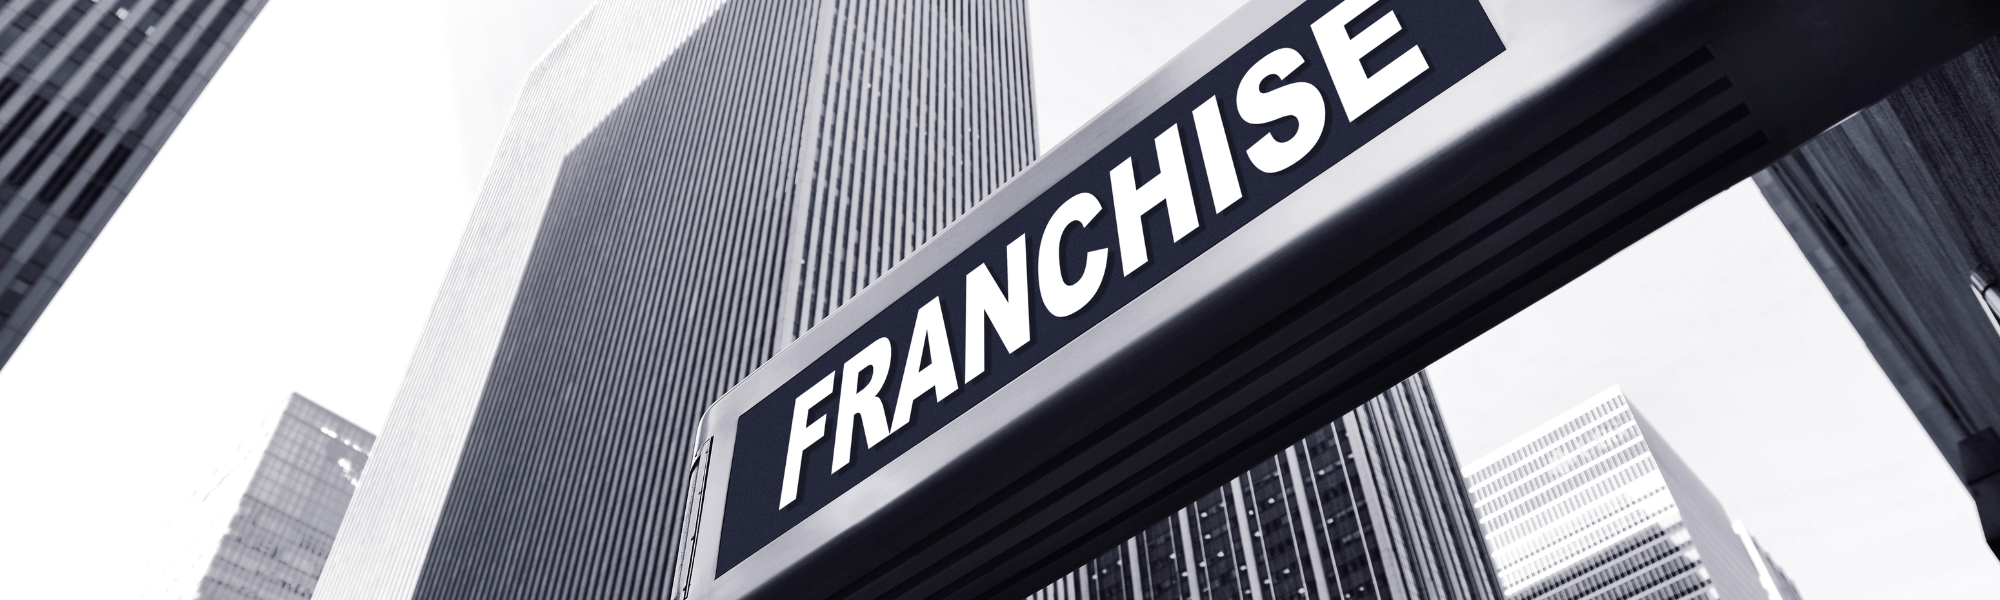 how to buy a franchise guide